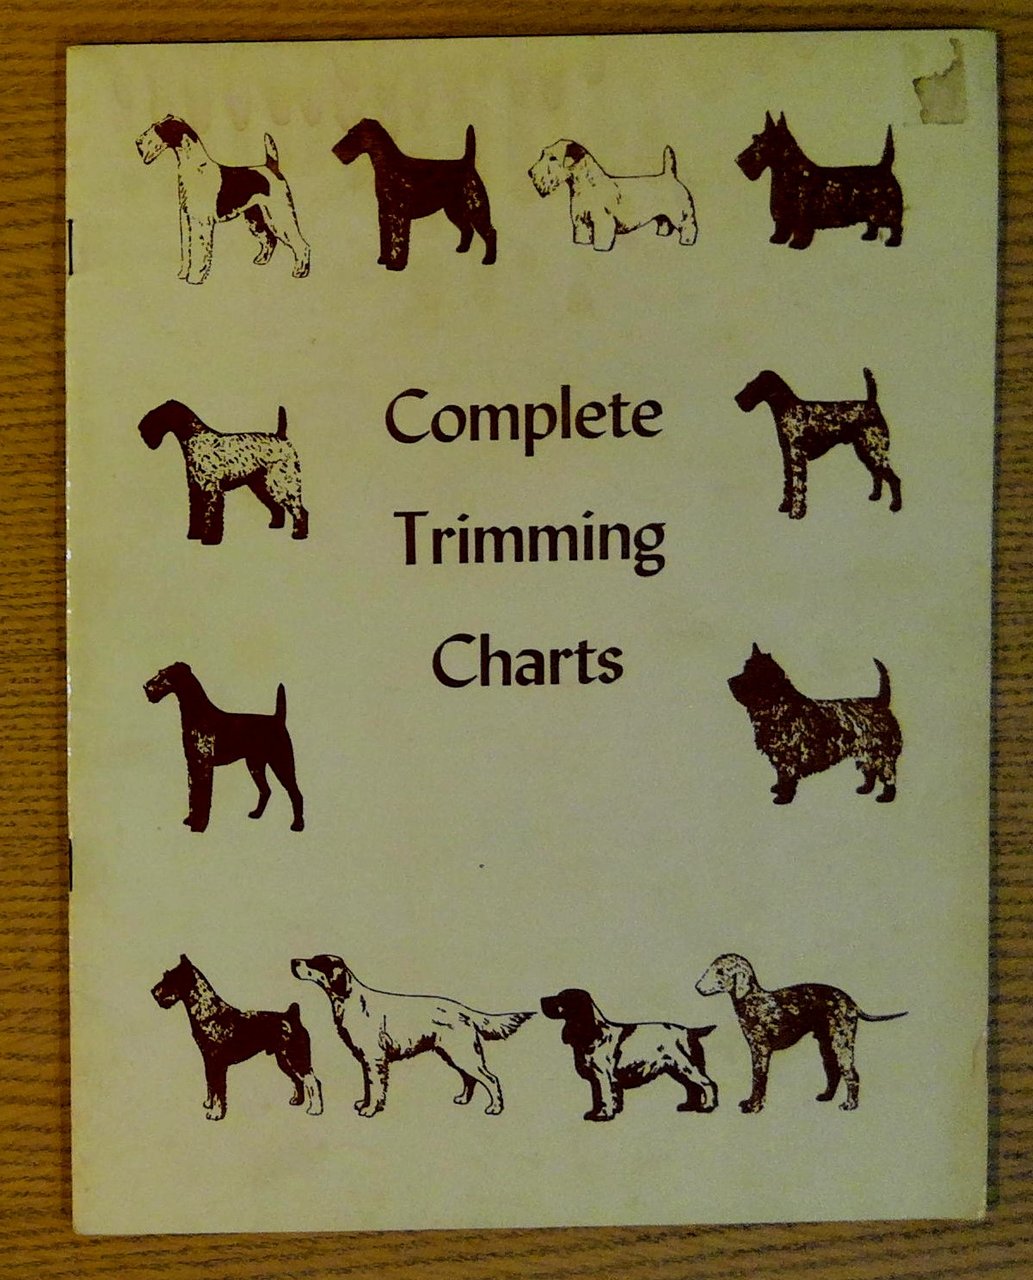 Complete Trimming Charts